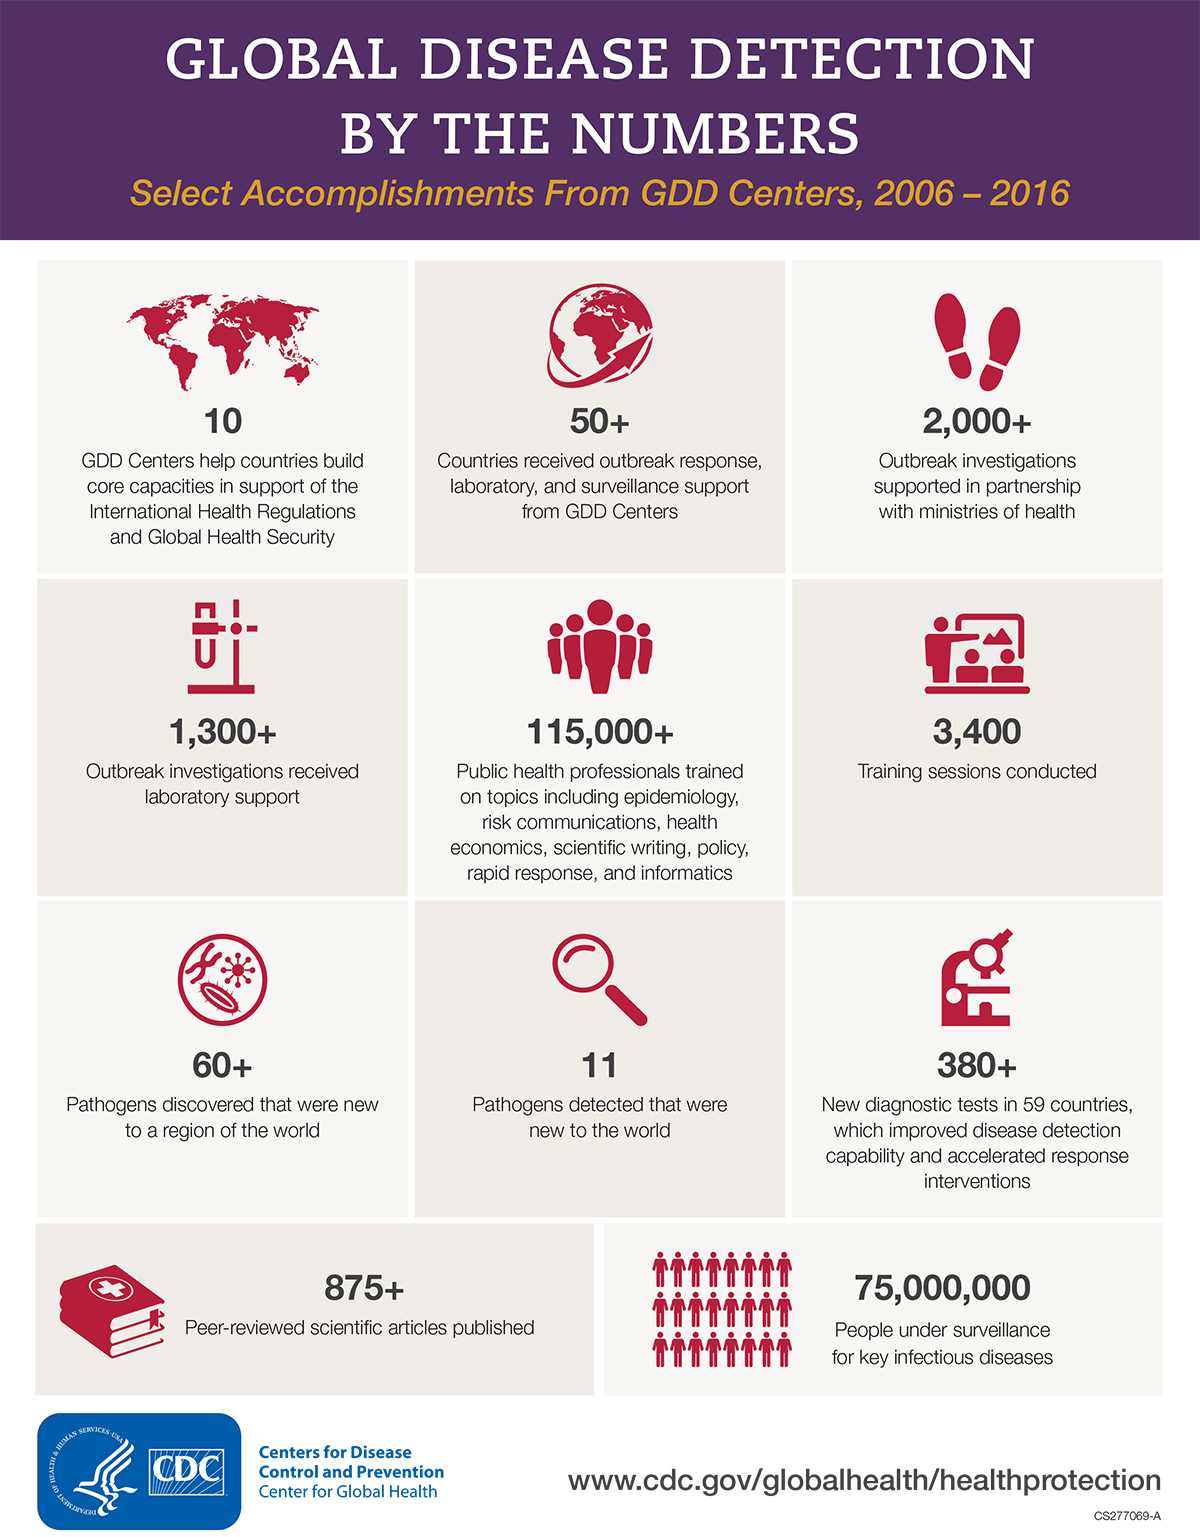 Global Disease Detection by the Numbers